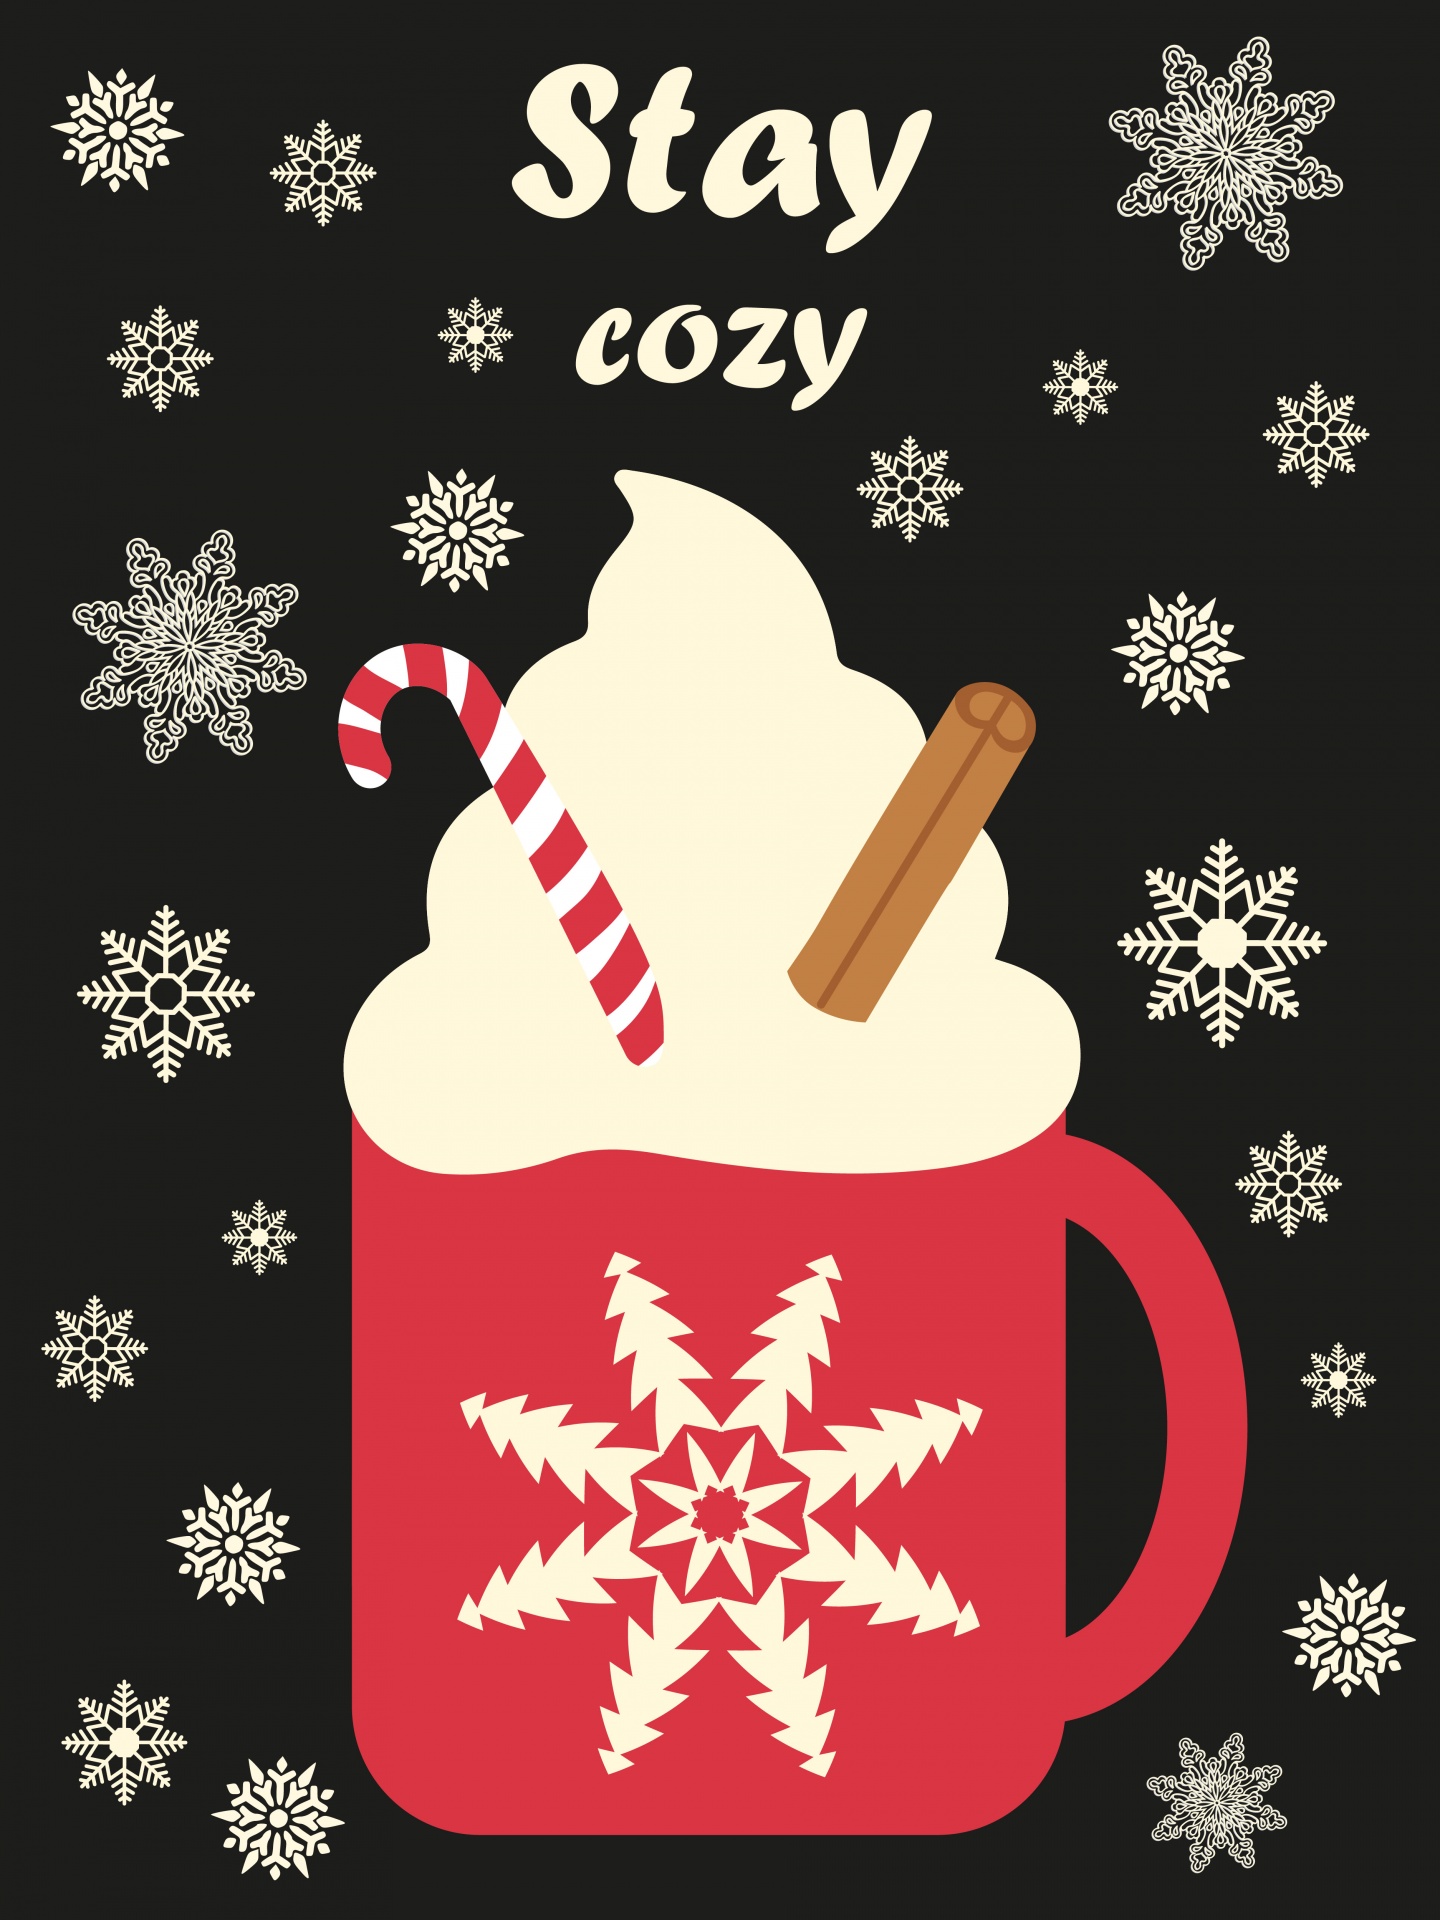 Hot chocolate drink in red mug with cream and candy cane on a snowflake background and typography stay cozy